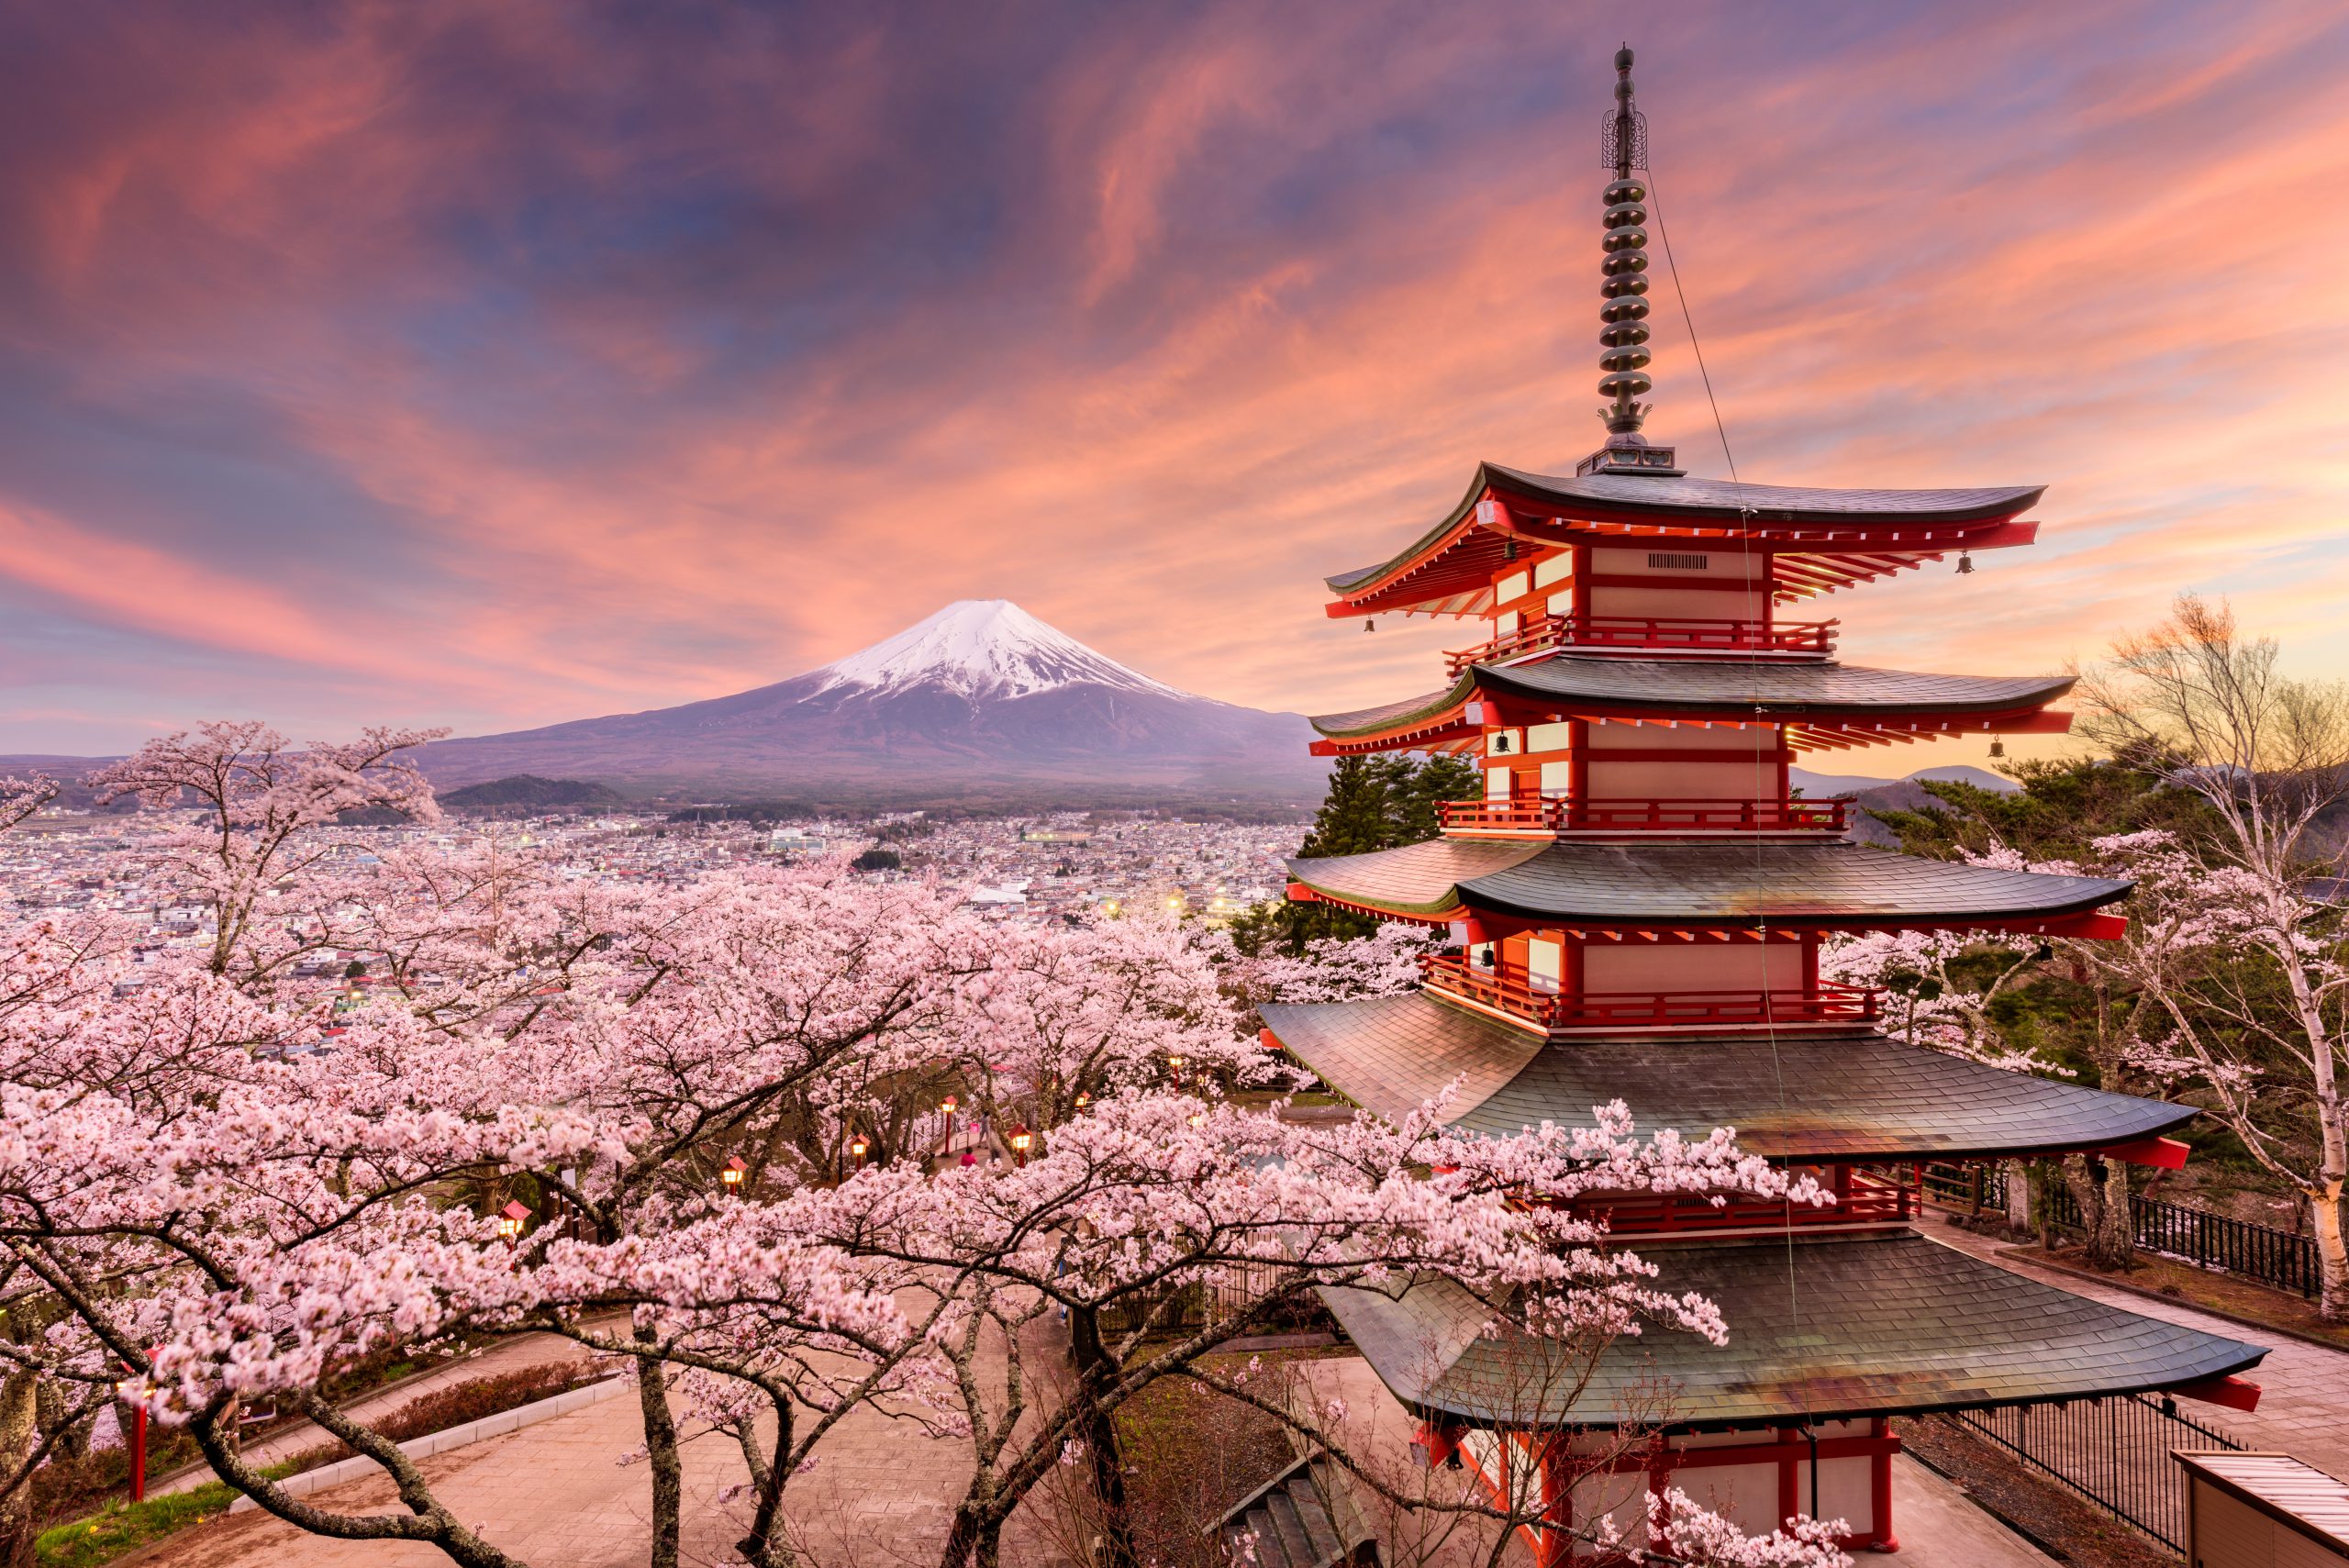 Watch wide-eyed at Japan's pink cherry blossoms with cruise and Mount Fuji tour from $333 per night